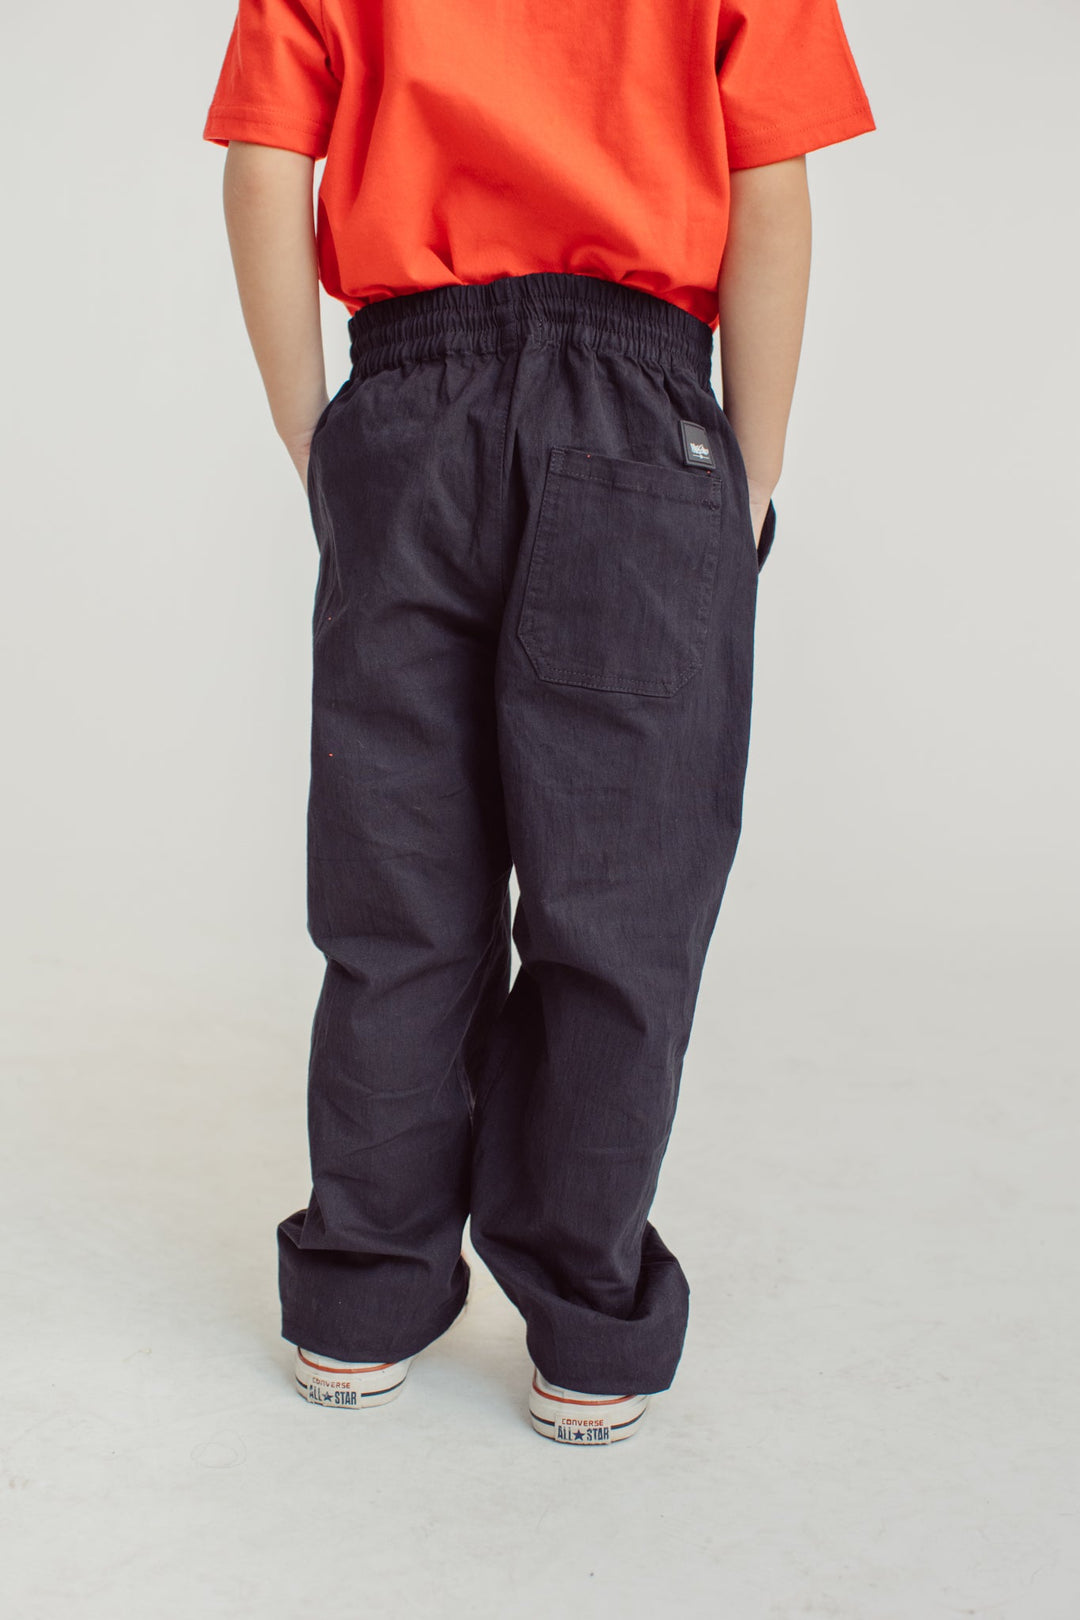 Mossimo Kids Boys Black Pull on Trousers with Drawstring - Mossimo PH